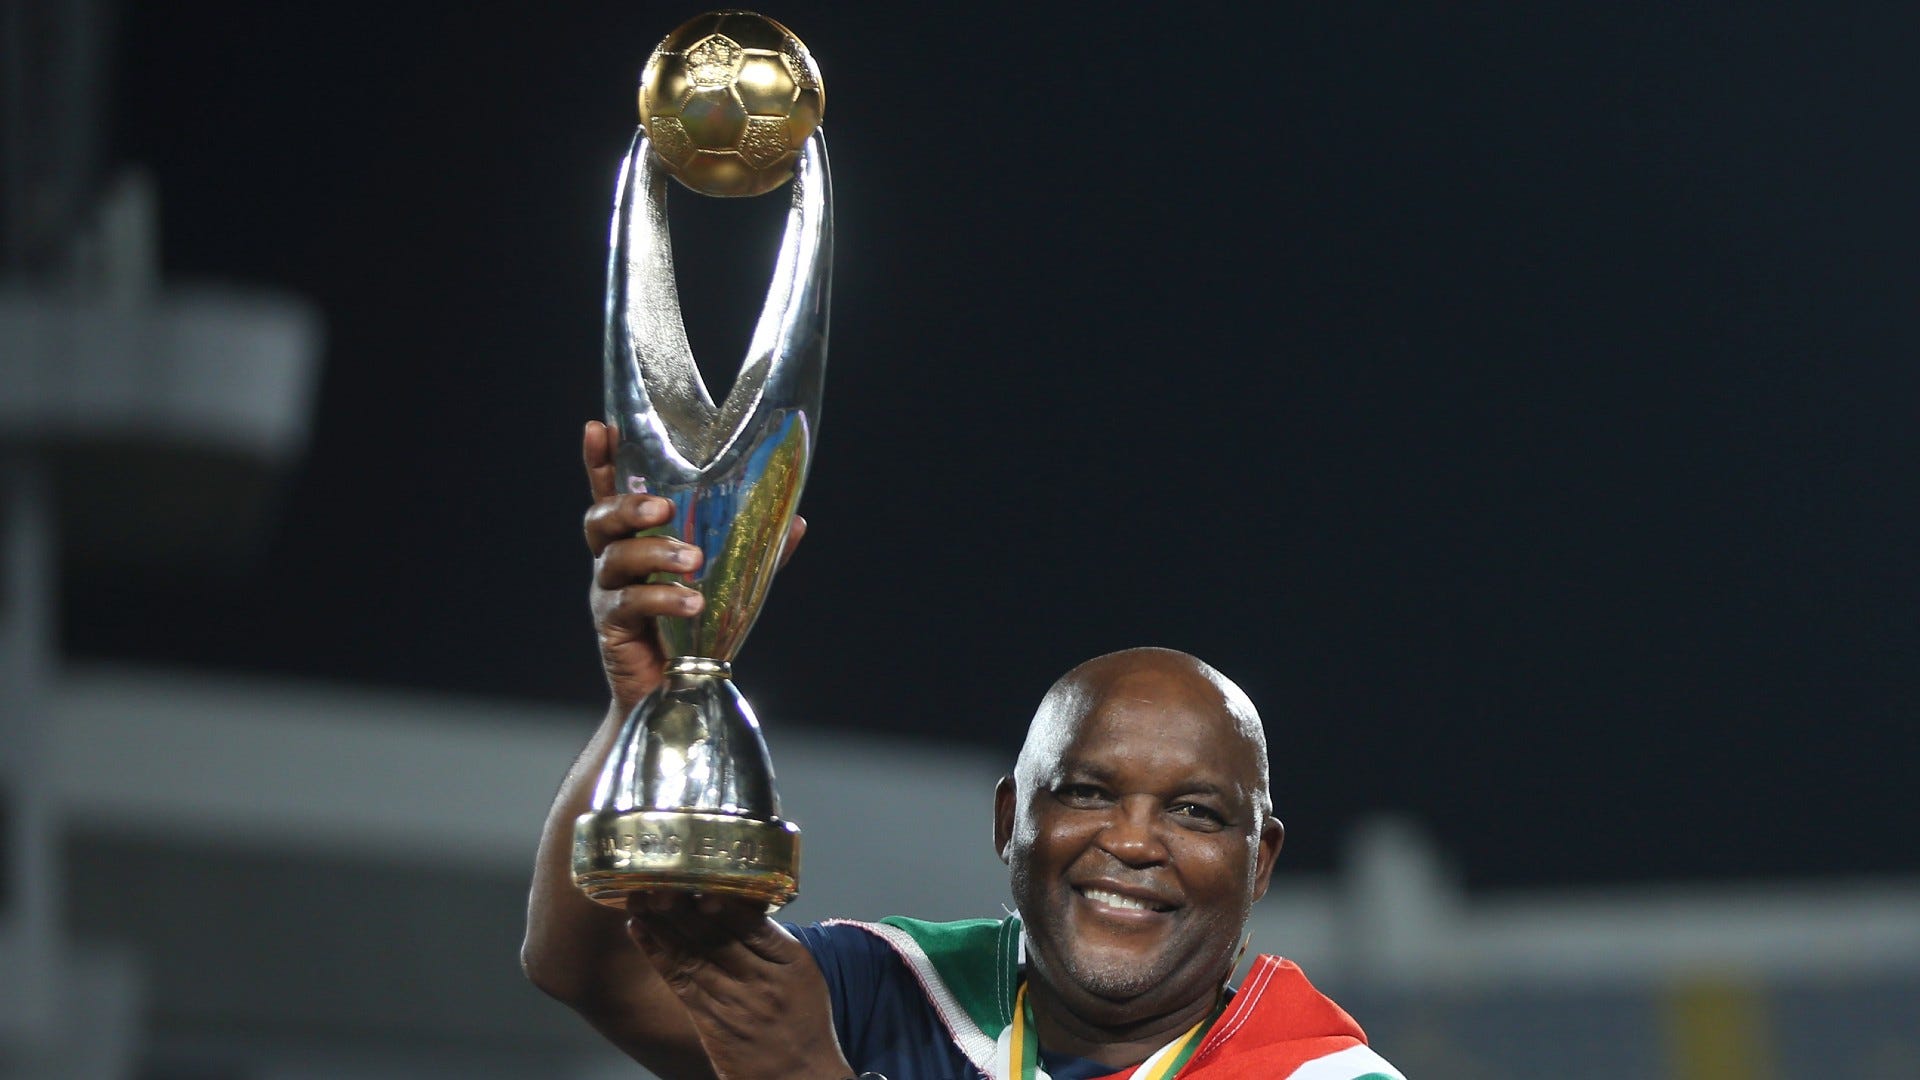 Pitso Mosimane, coach of Al Ahly holds trophy